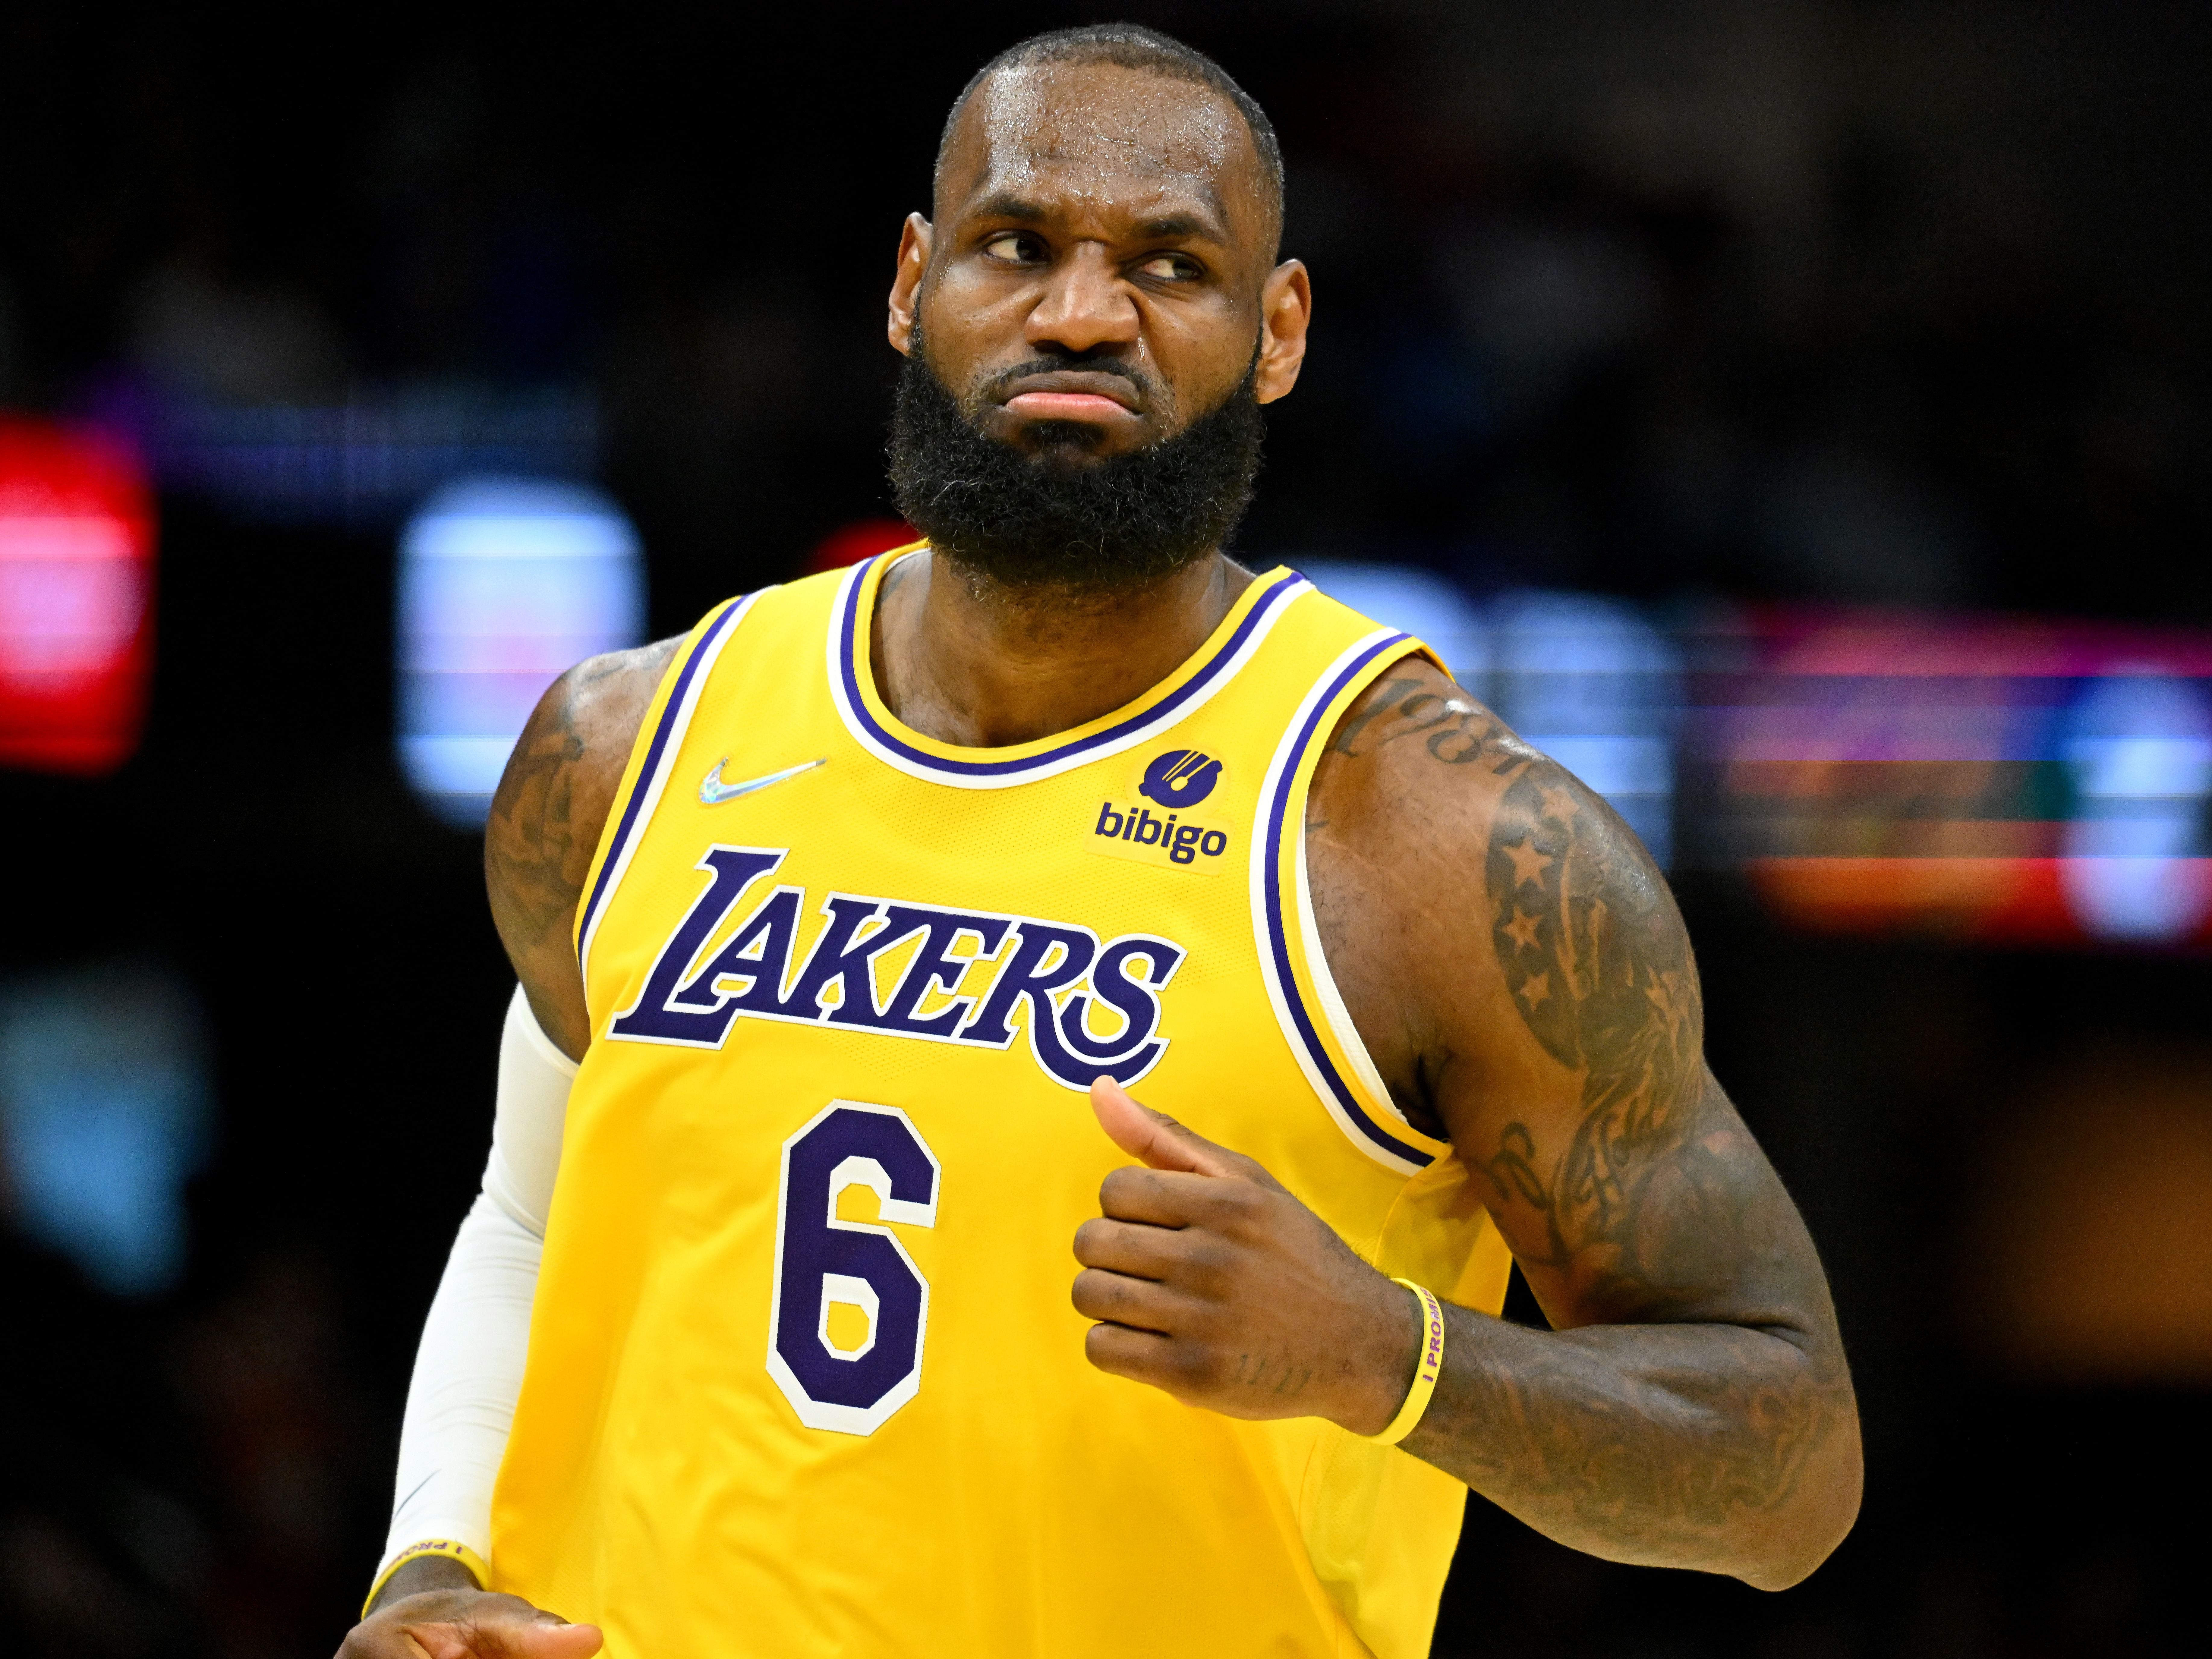 LeBron James of the LA Lakers during an NBA game.